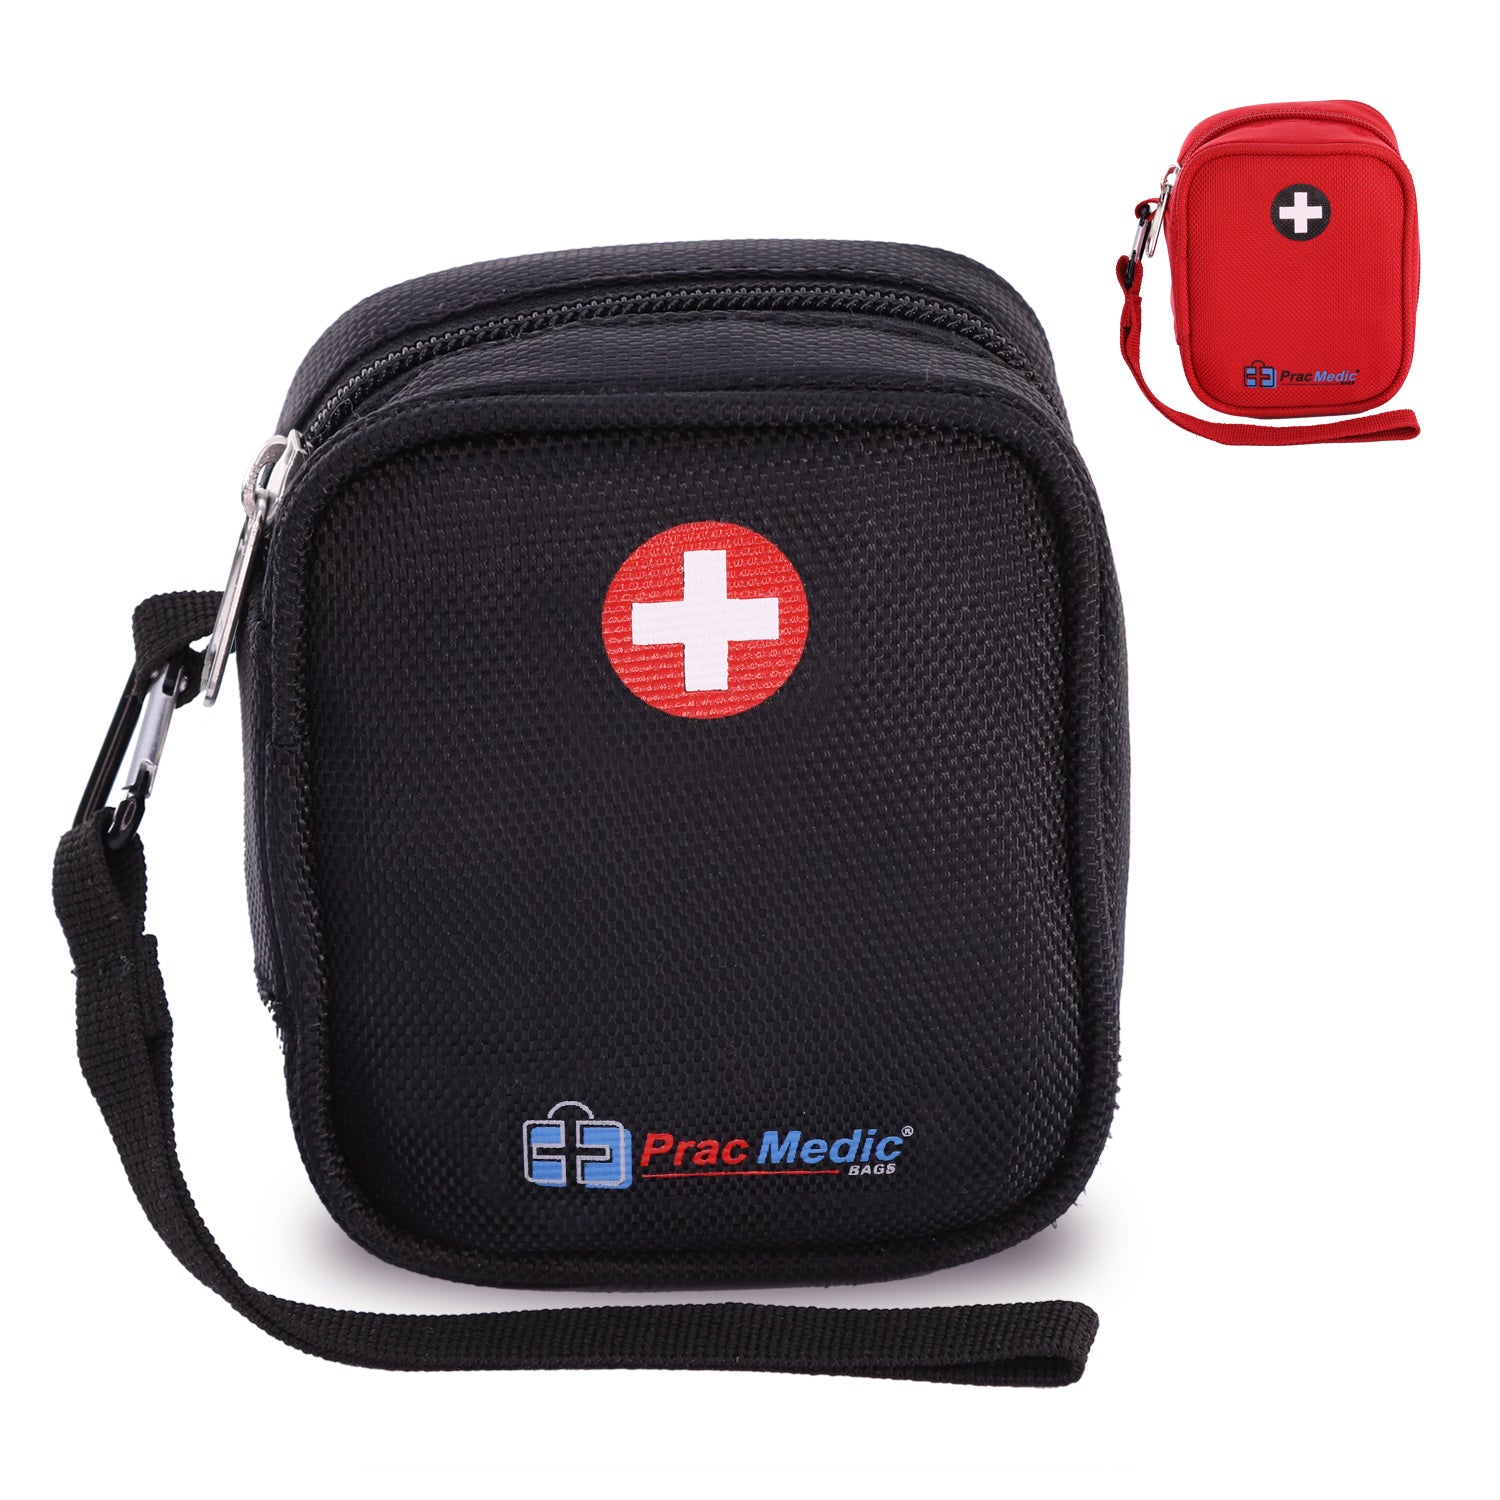 travel pouch for medicine